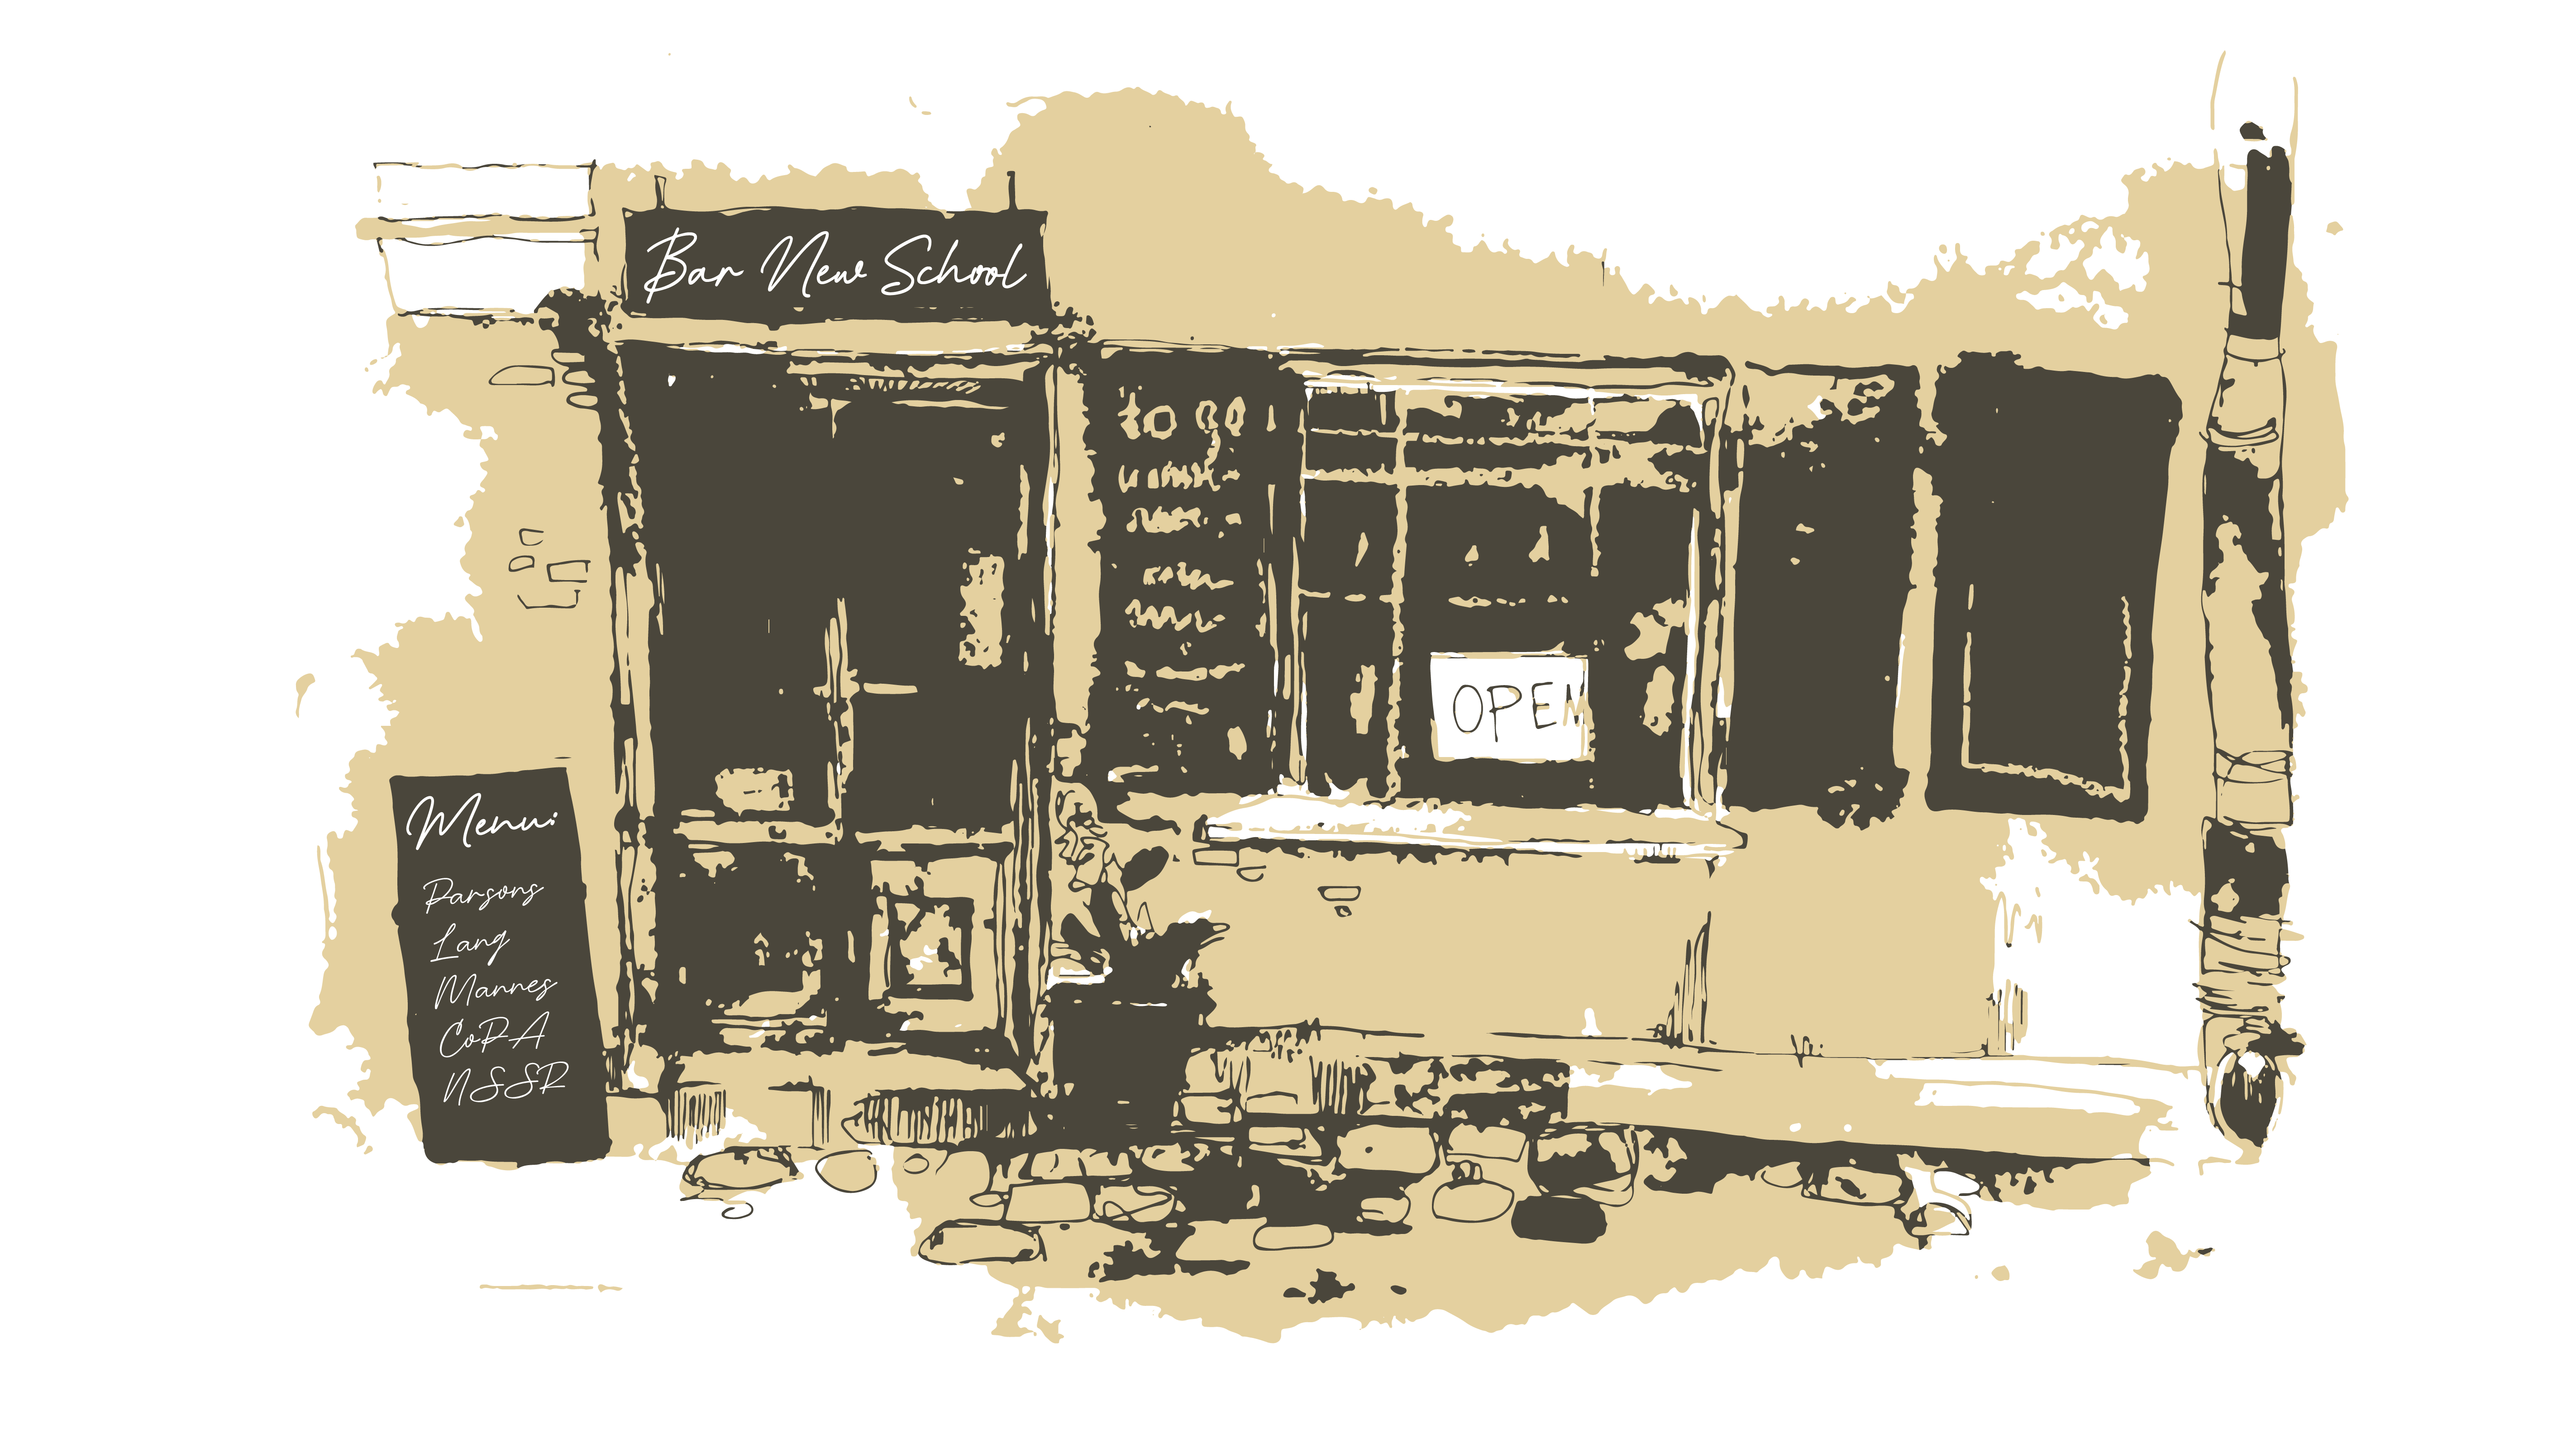 Illustration in shades of brown shows the facade of a cafe, with a sign hanging above the door that reads "Bar new School."